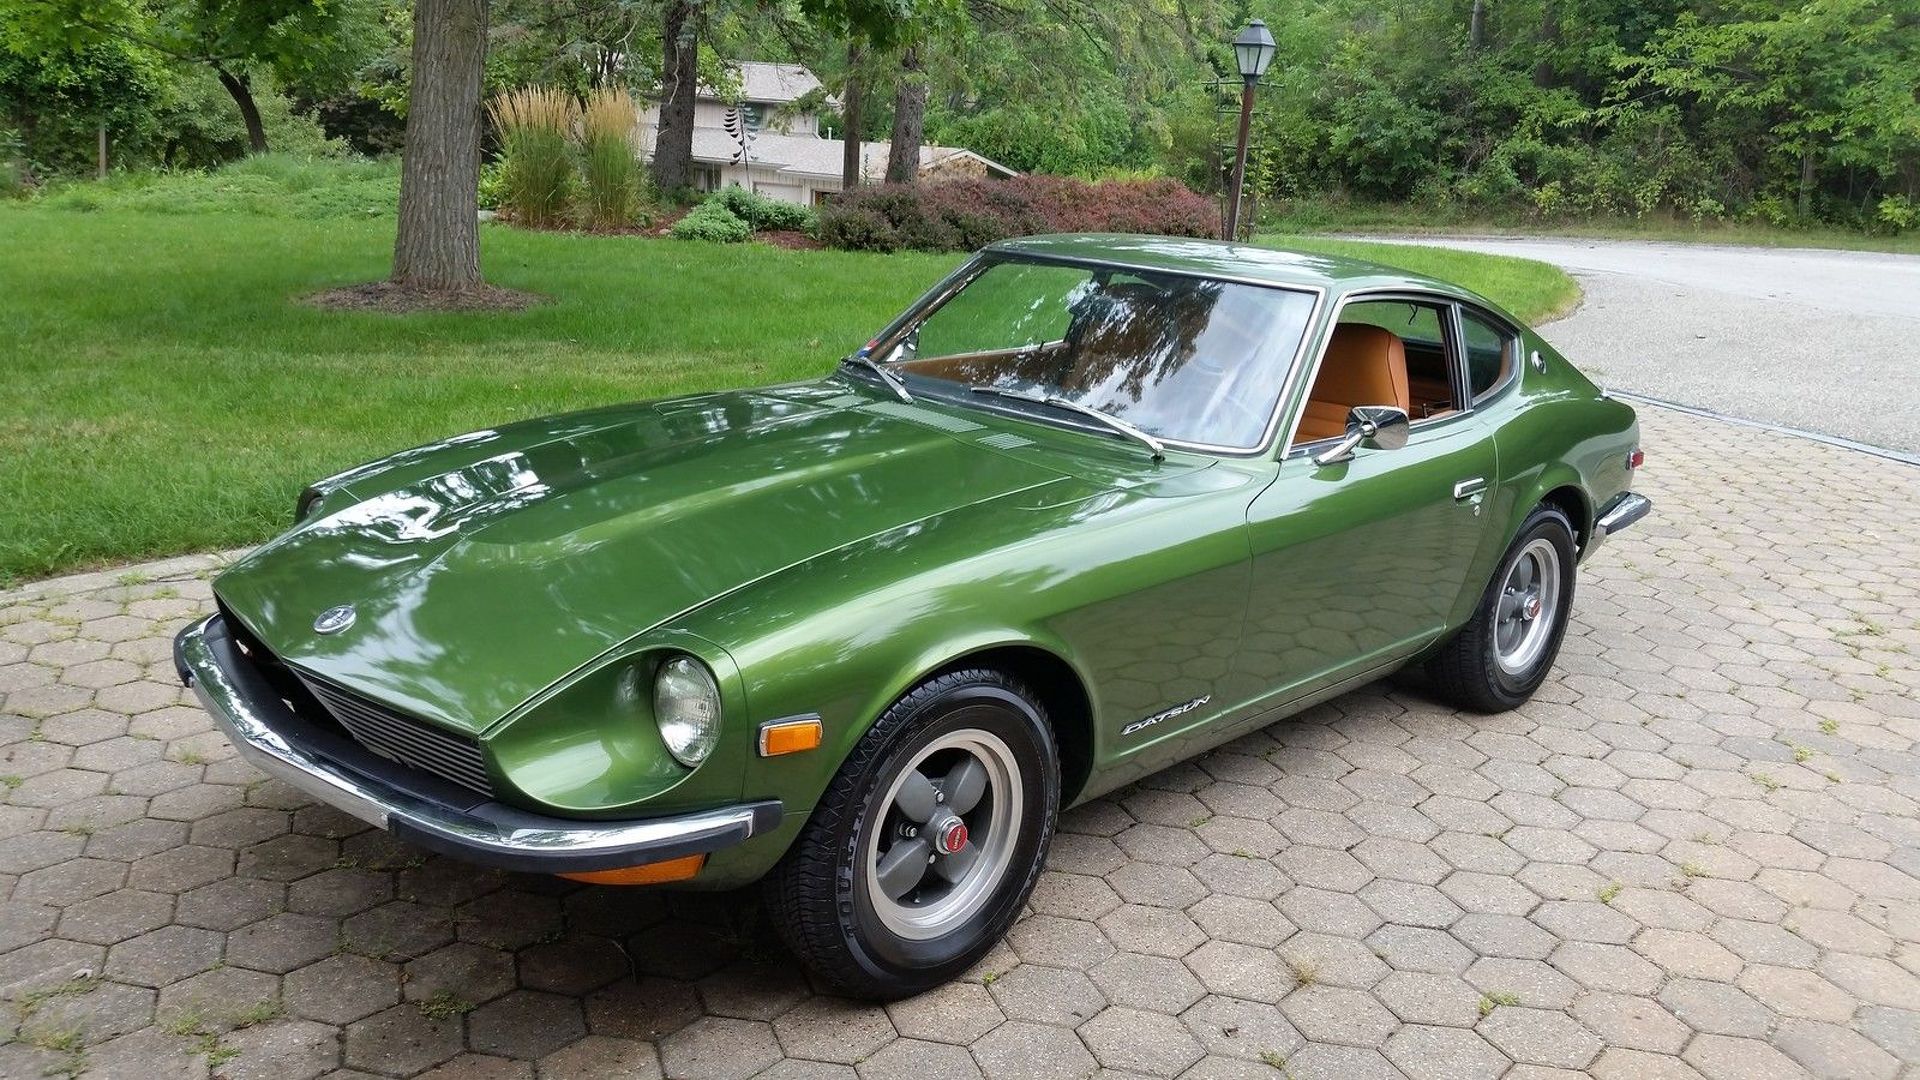 For Sale: Immaculate 1973 Datsun 240Z in the USA | PerformanceDrive